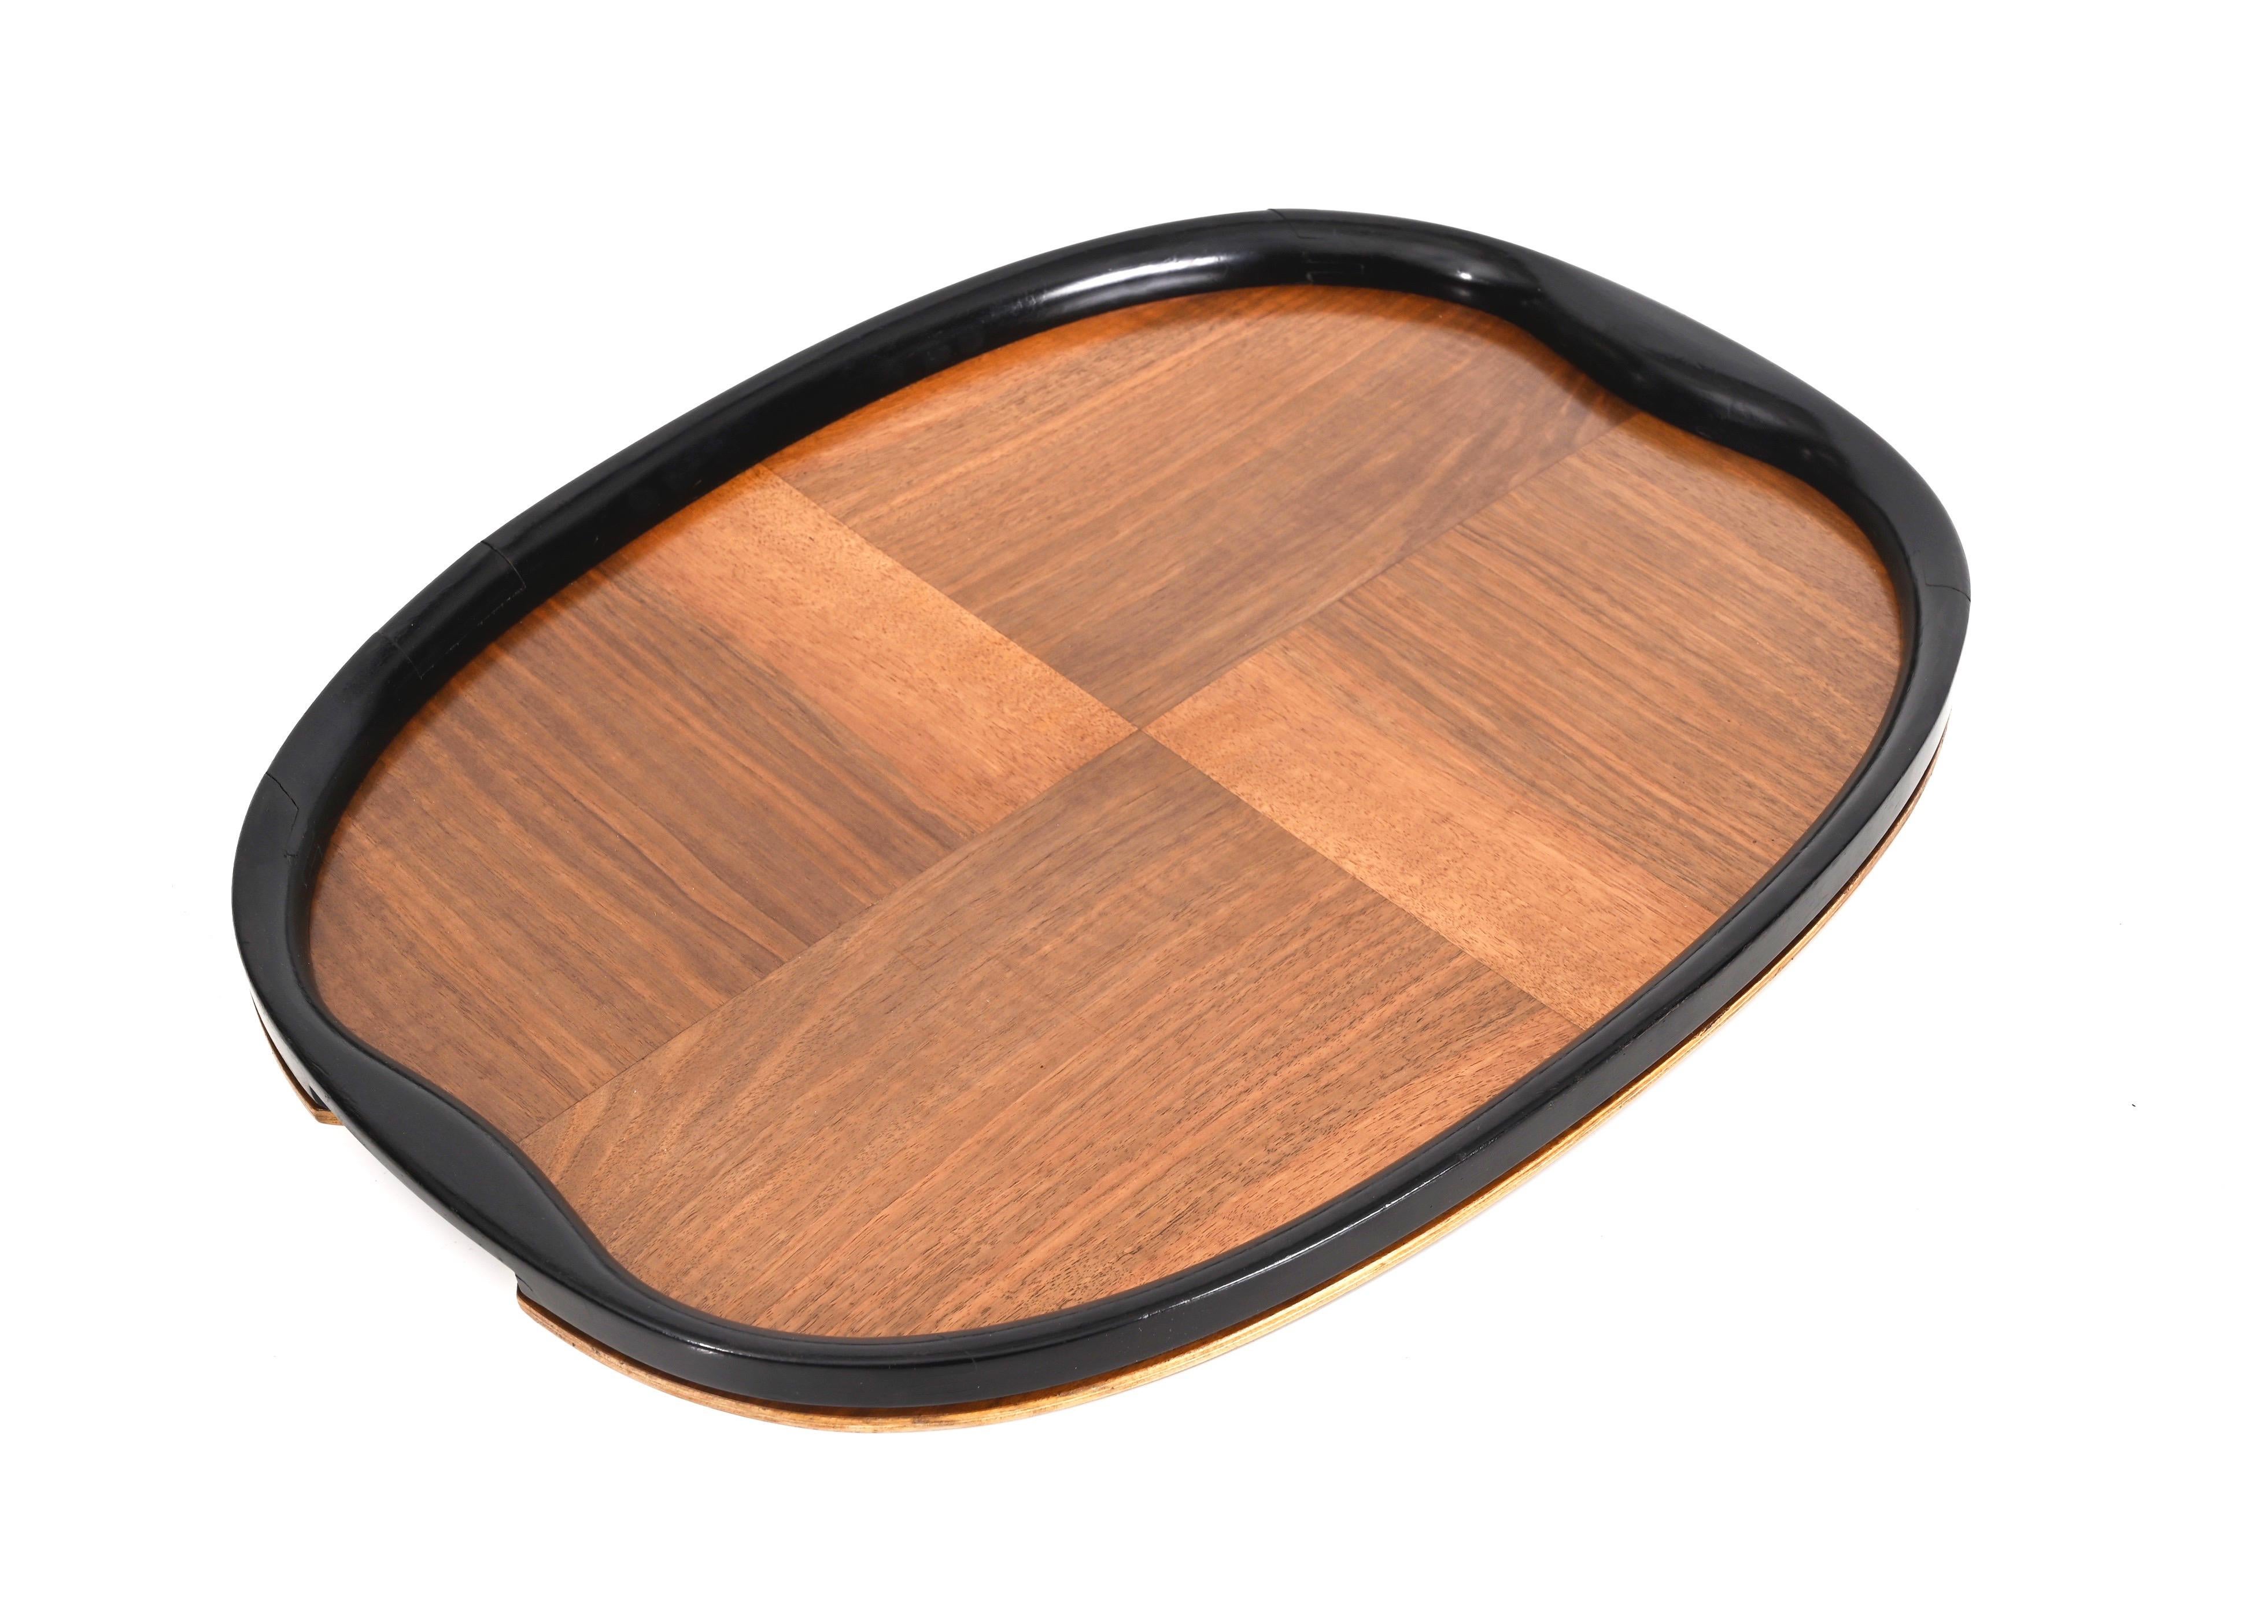 Italian Pair of Art Deco Serving Trays, Ebonized Wood and Walnut, Italy, 1940s For Sale